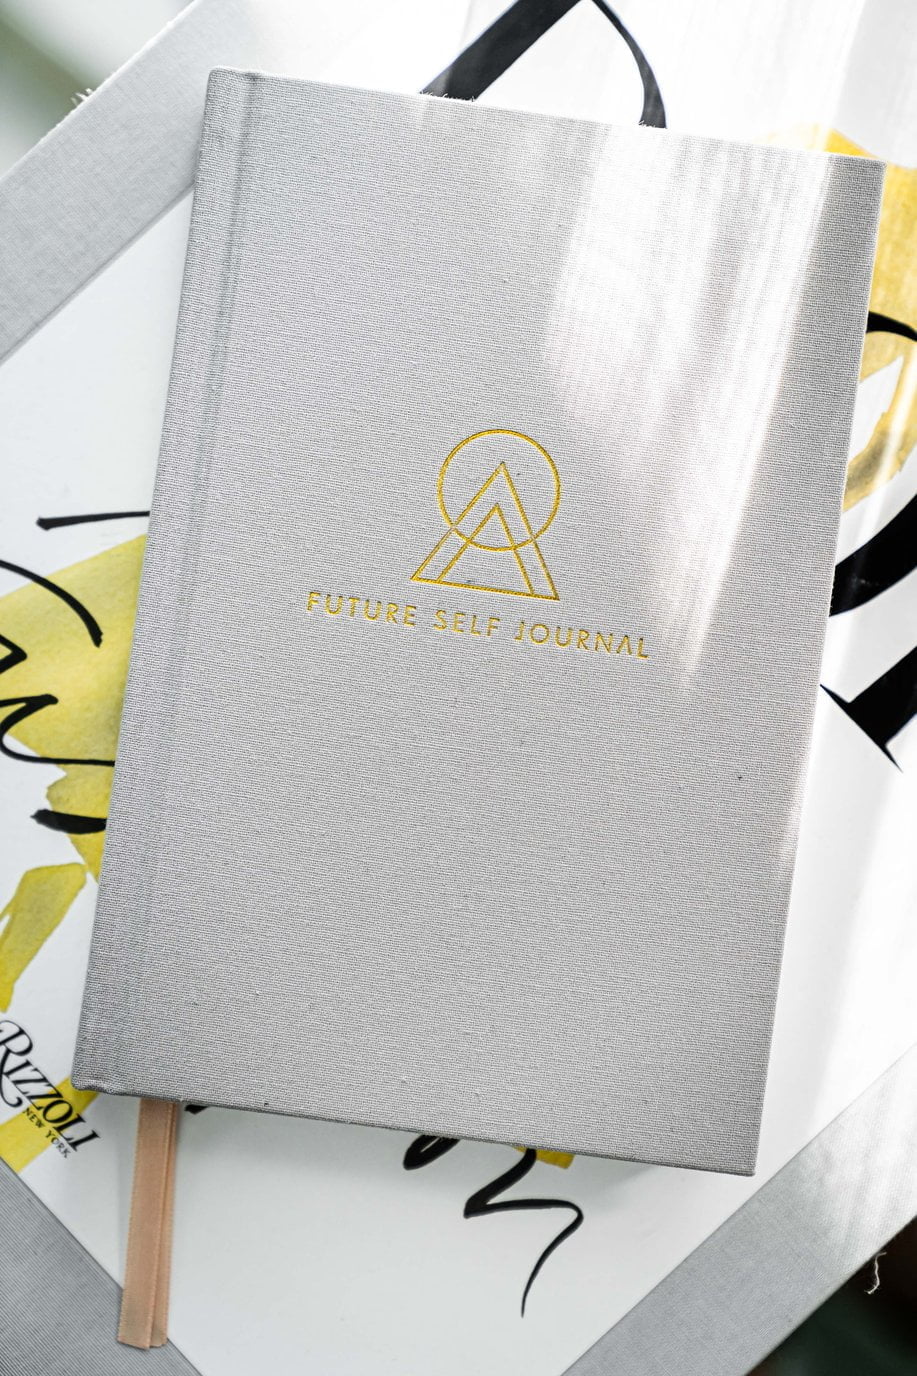 10% Off With Future Self Journal Discount Code